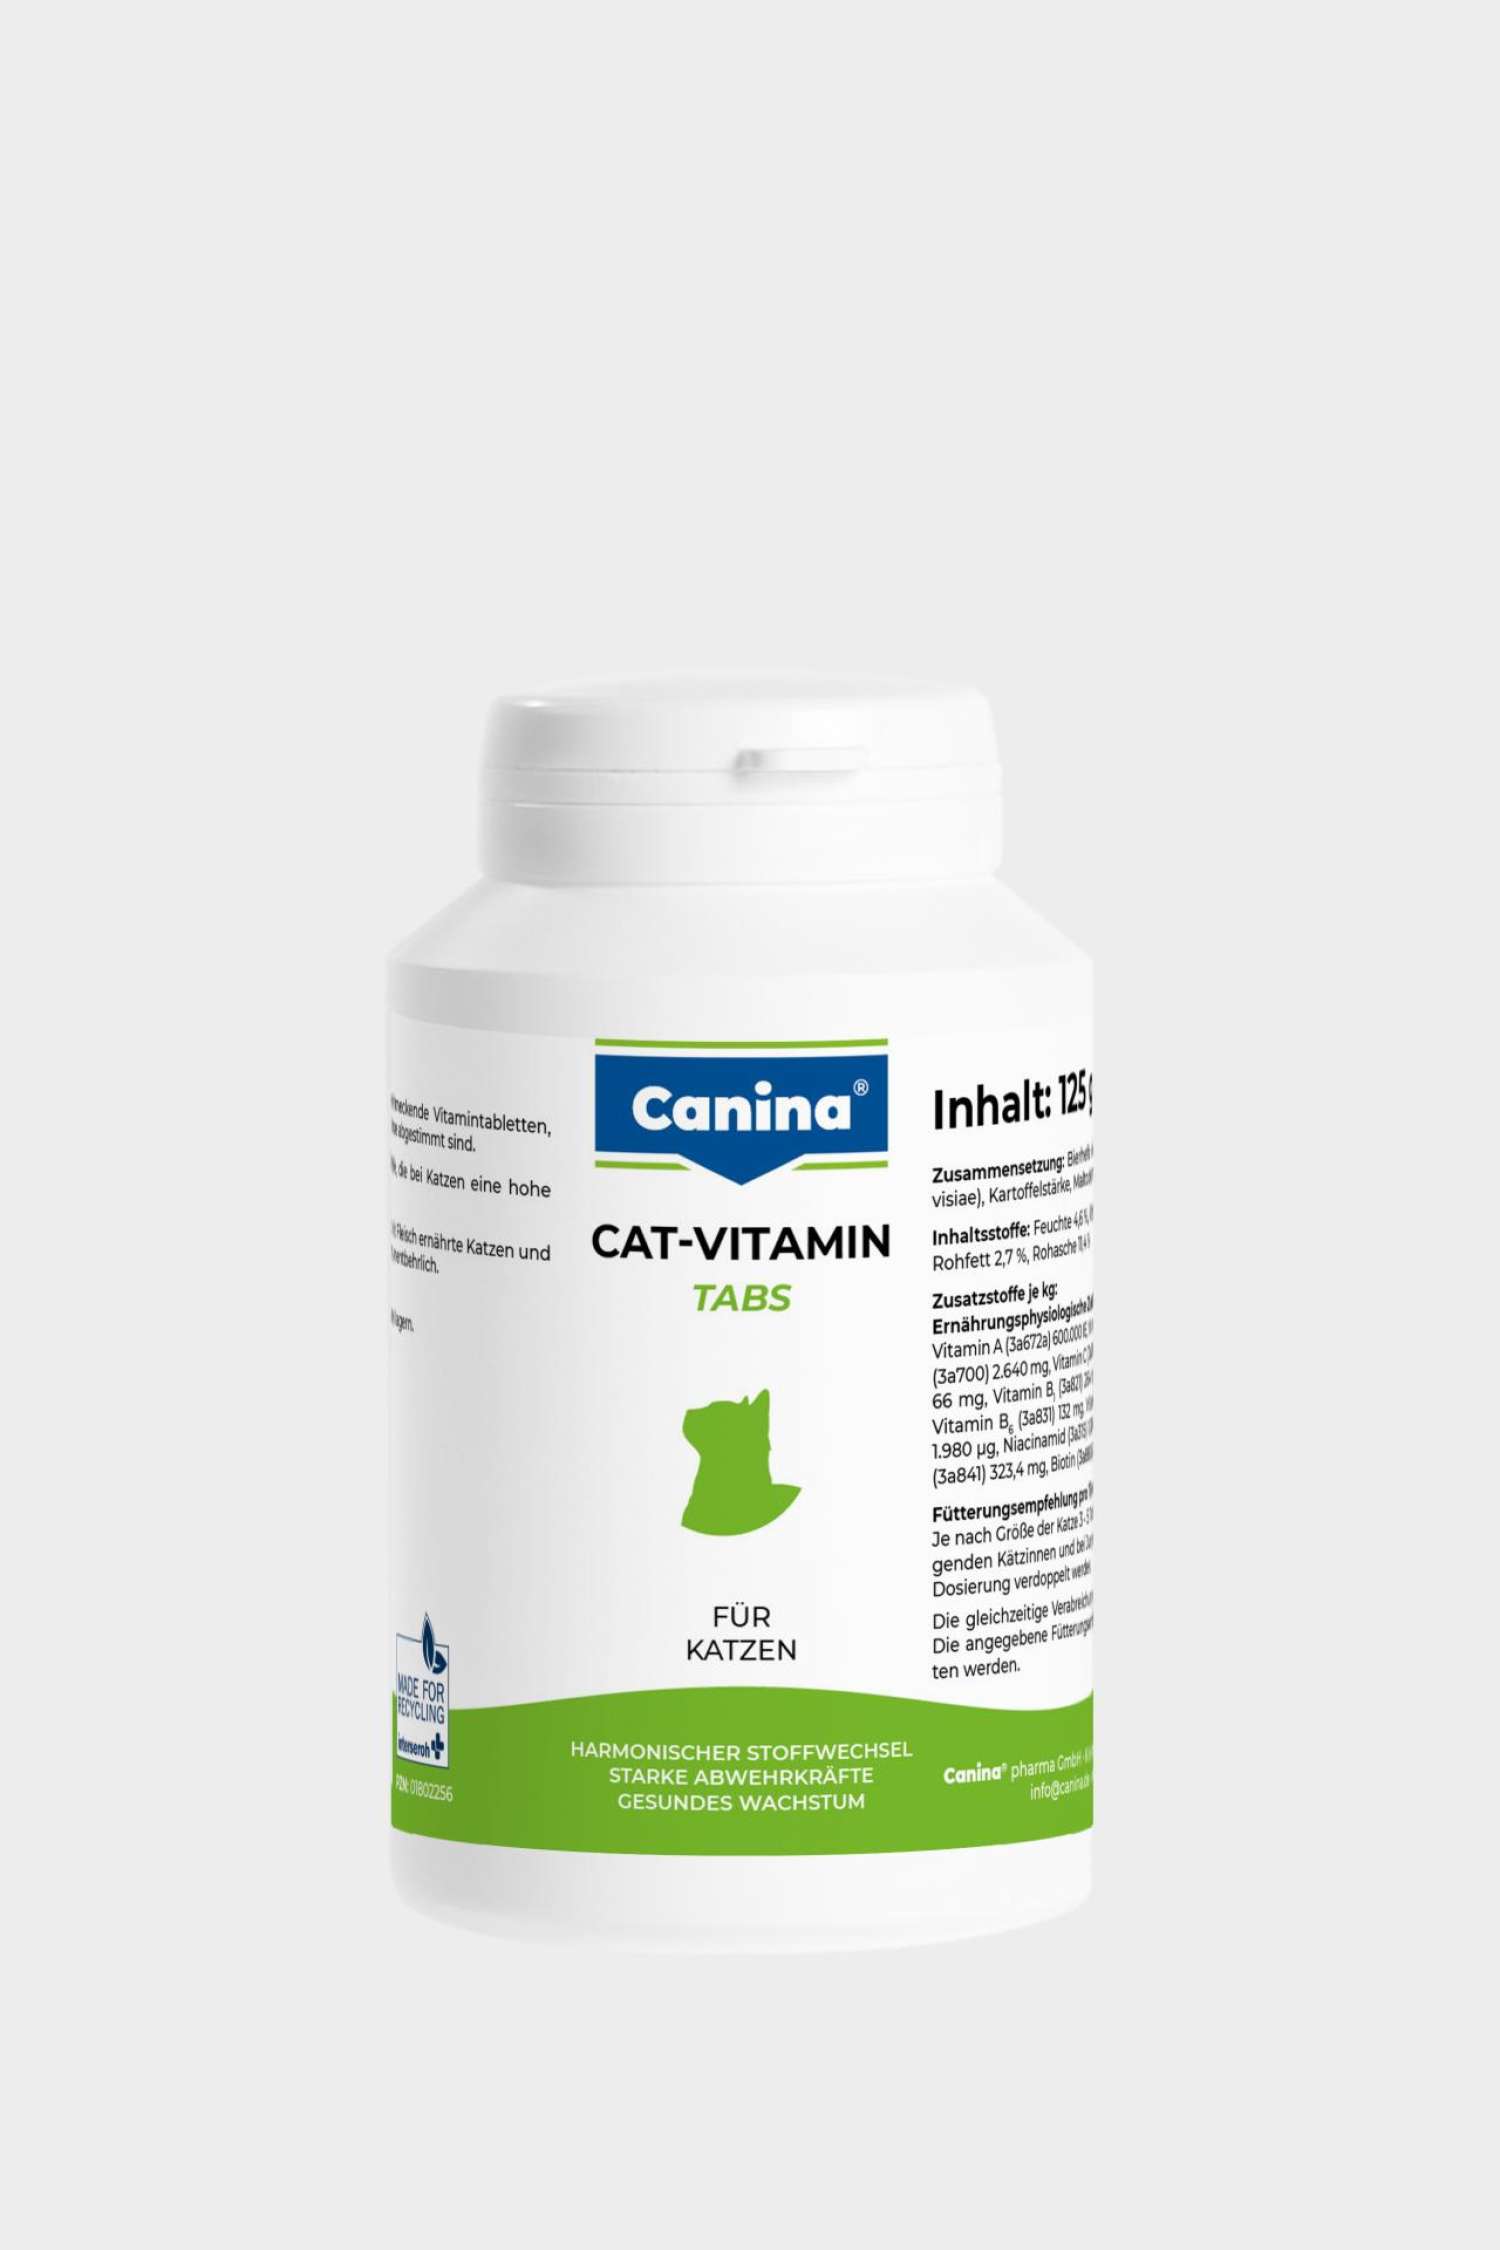 Cat-Vitamin Tabs approx. 100 pieces